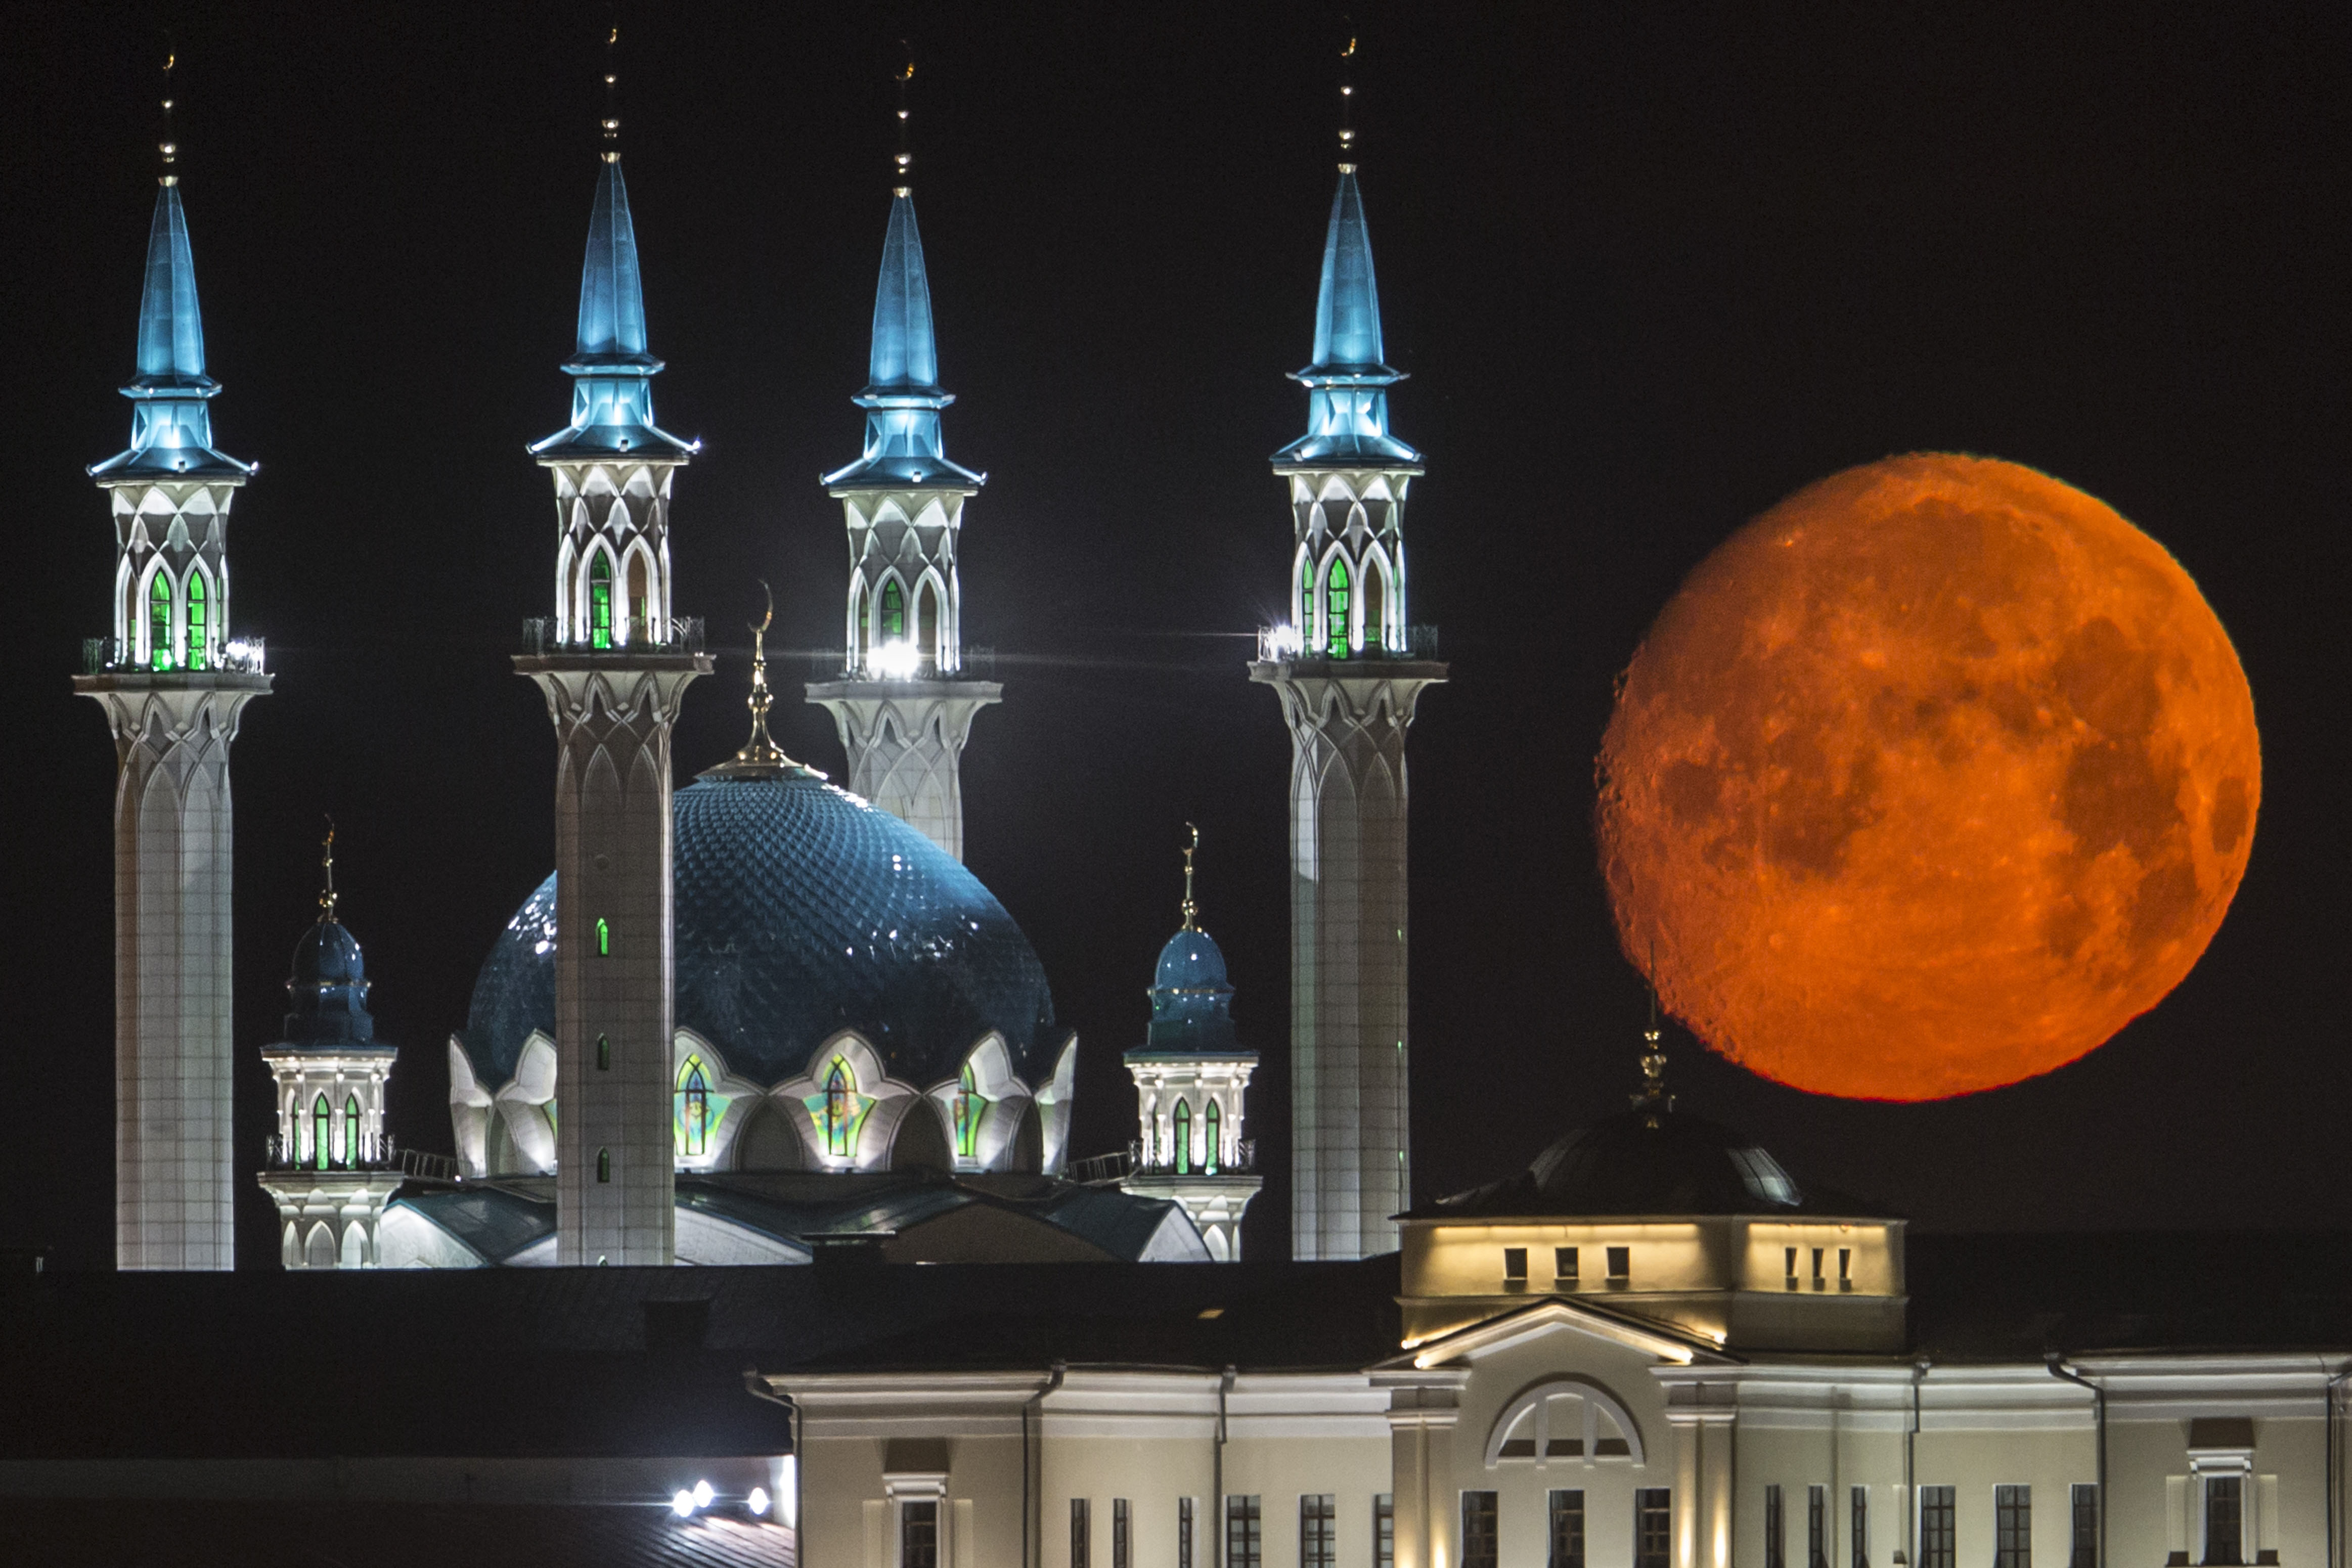 AP10ThingsToSee - The full moon rises over the illuminated Kazan Kremlin with the Qol Sharif mosque illuminated in Kazan, the capital of Tatarstan, located in Russia's Volga River area about 700 km (450 miles) east of Moscow, early Wednesday, July, 29, 2015. (AP Photo/Denis Tyrin)